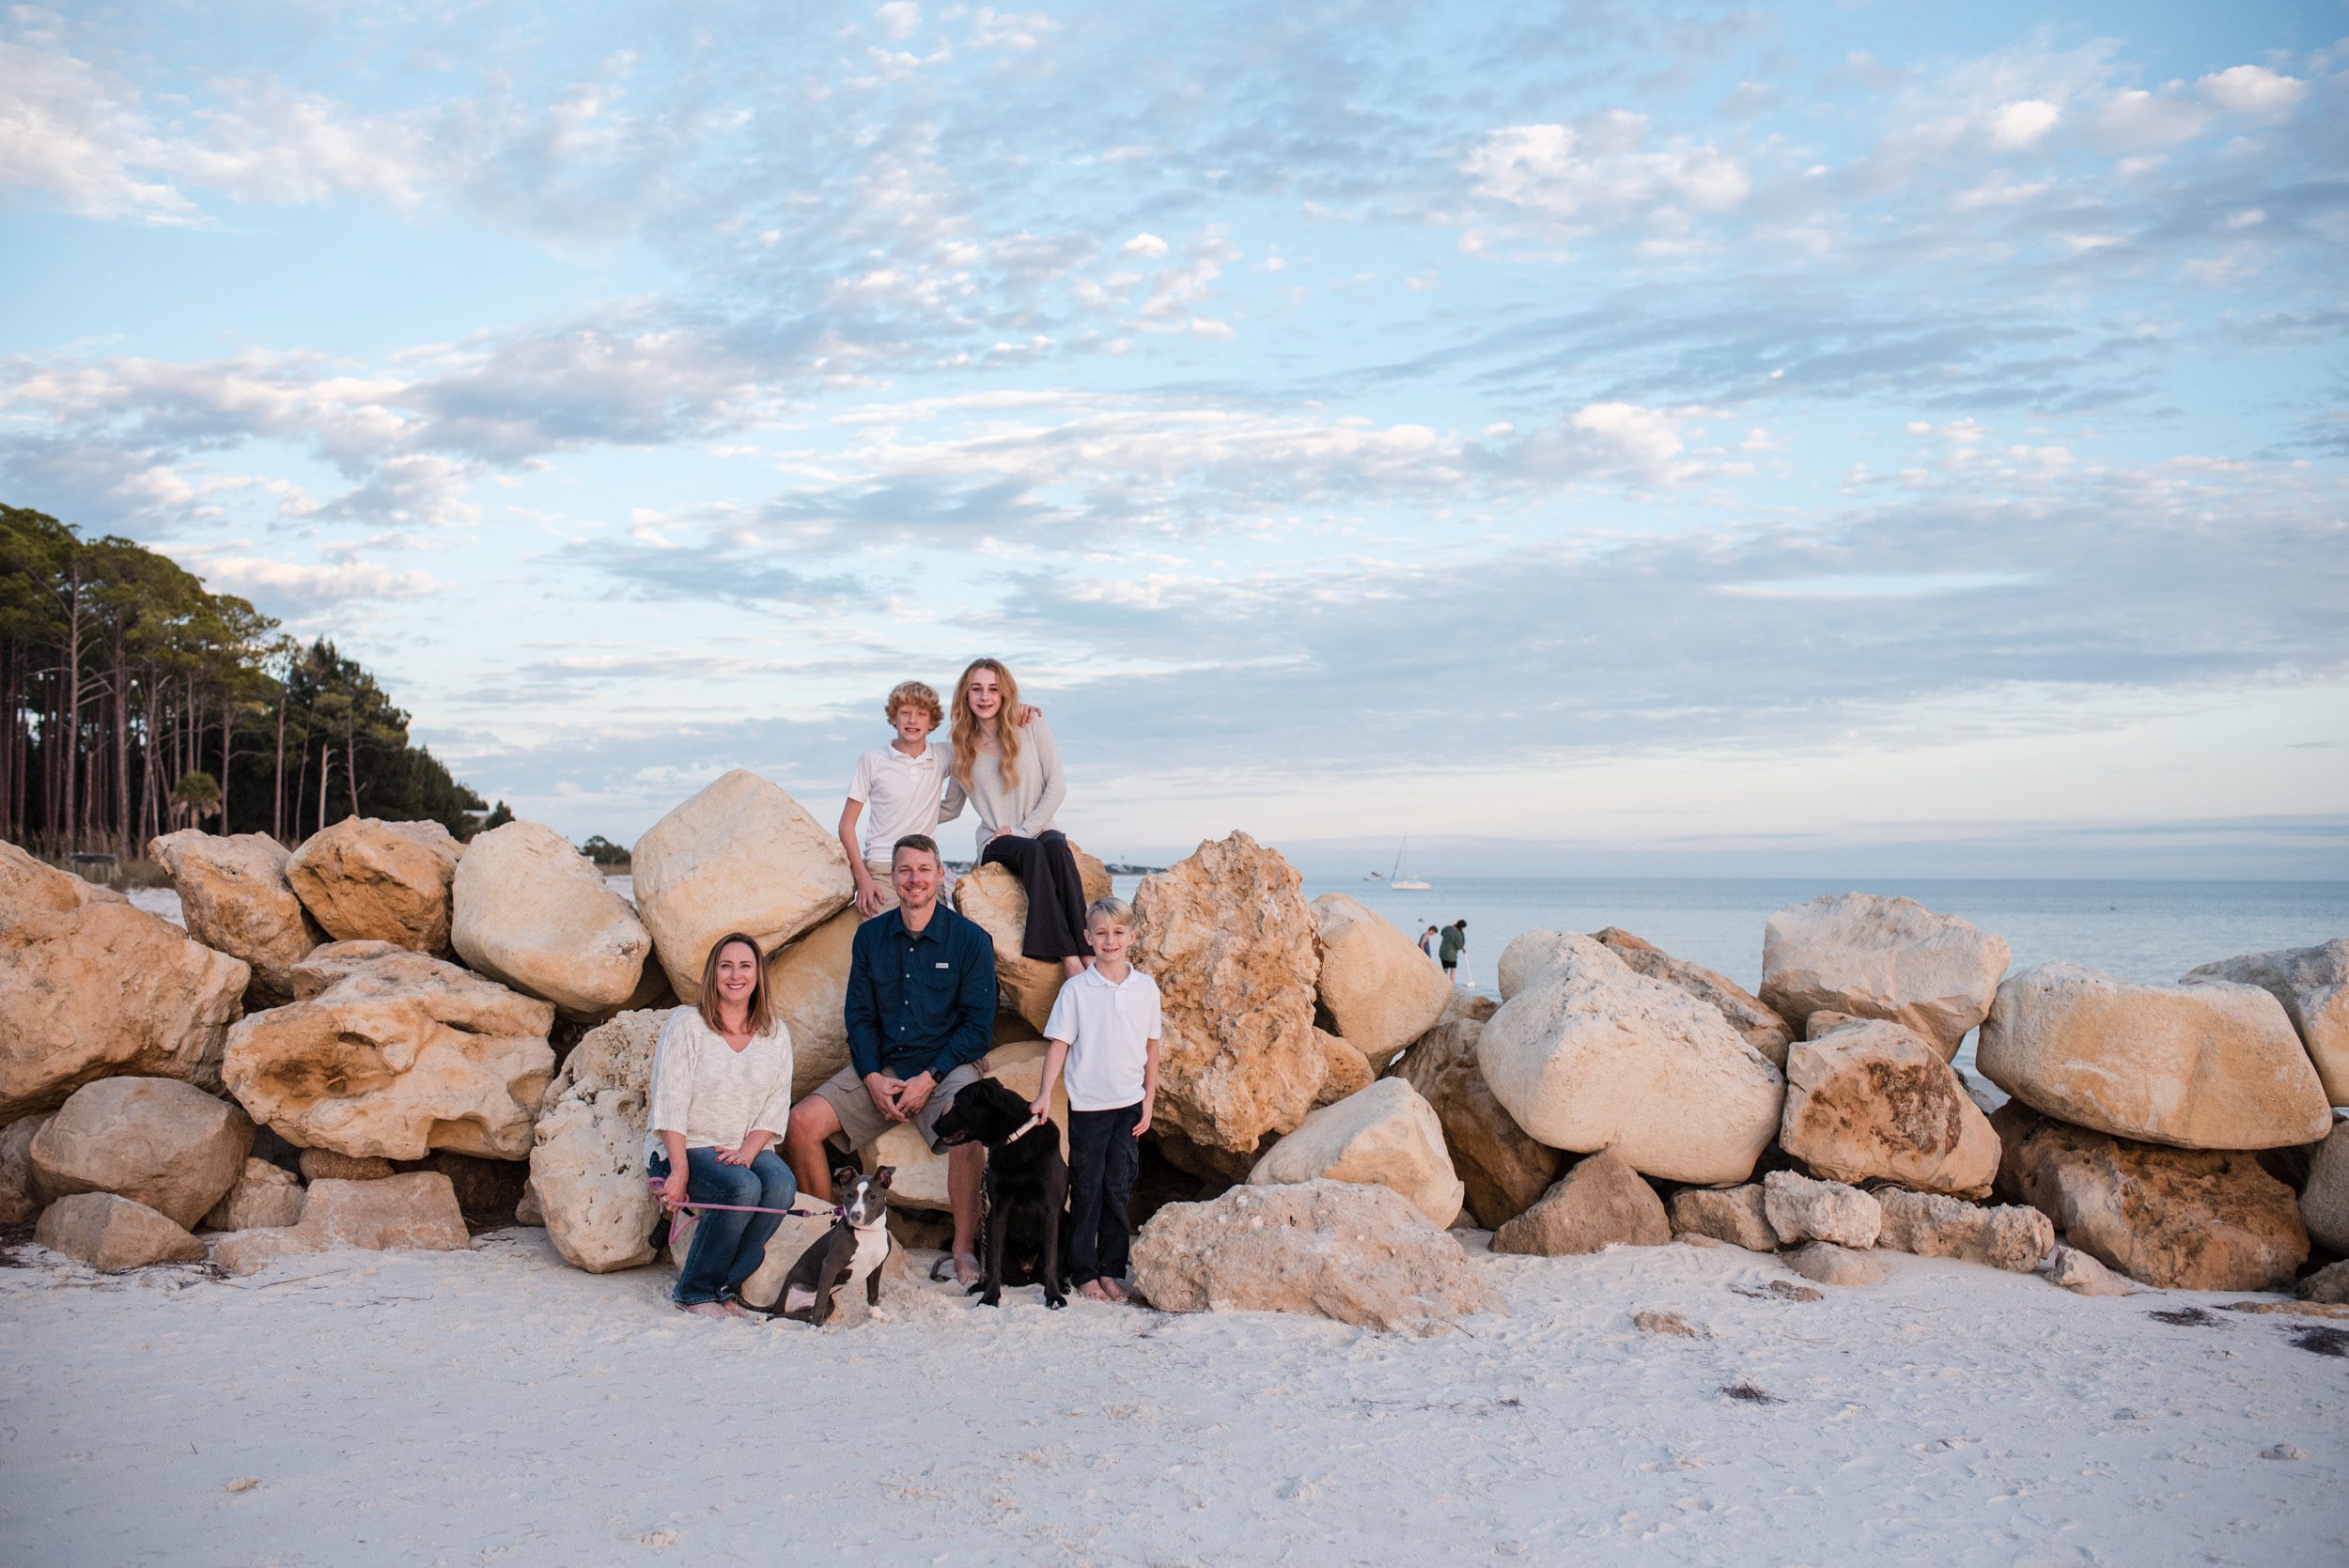 Family enjoys spending time together on the beach at Alligator Point in Florida during sunset.